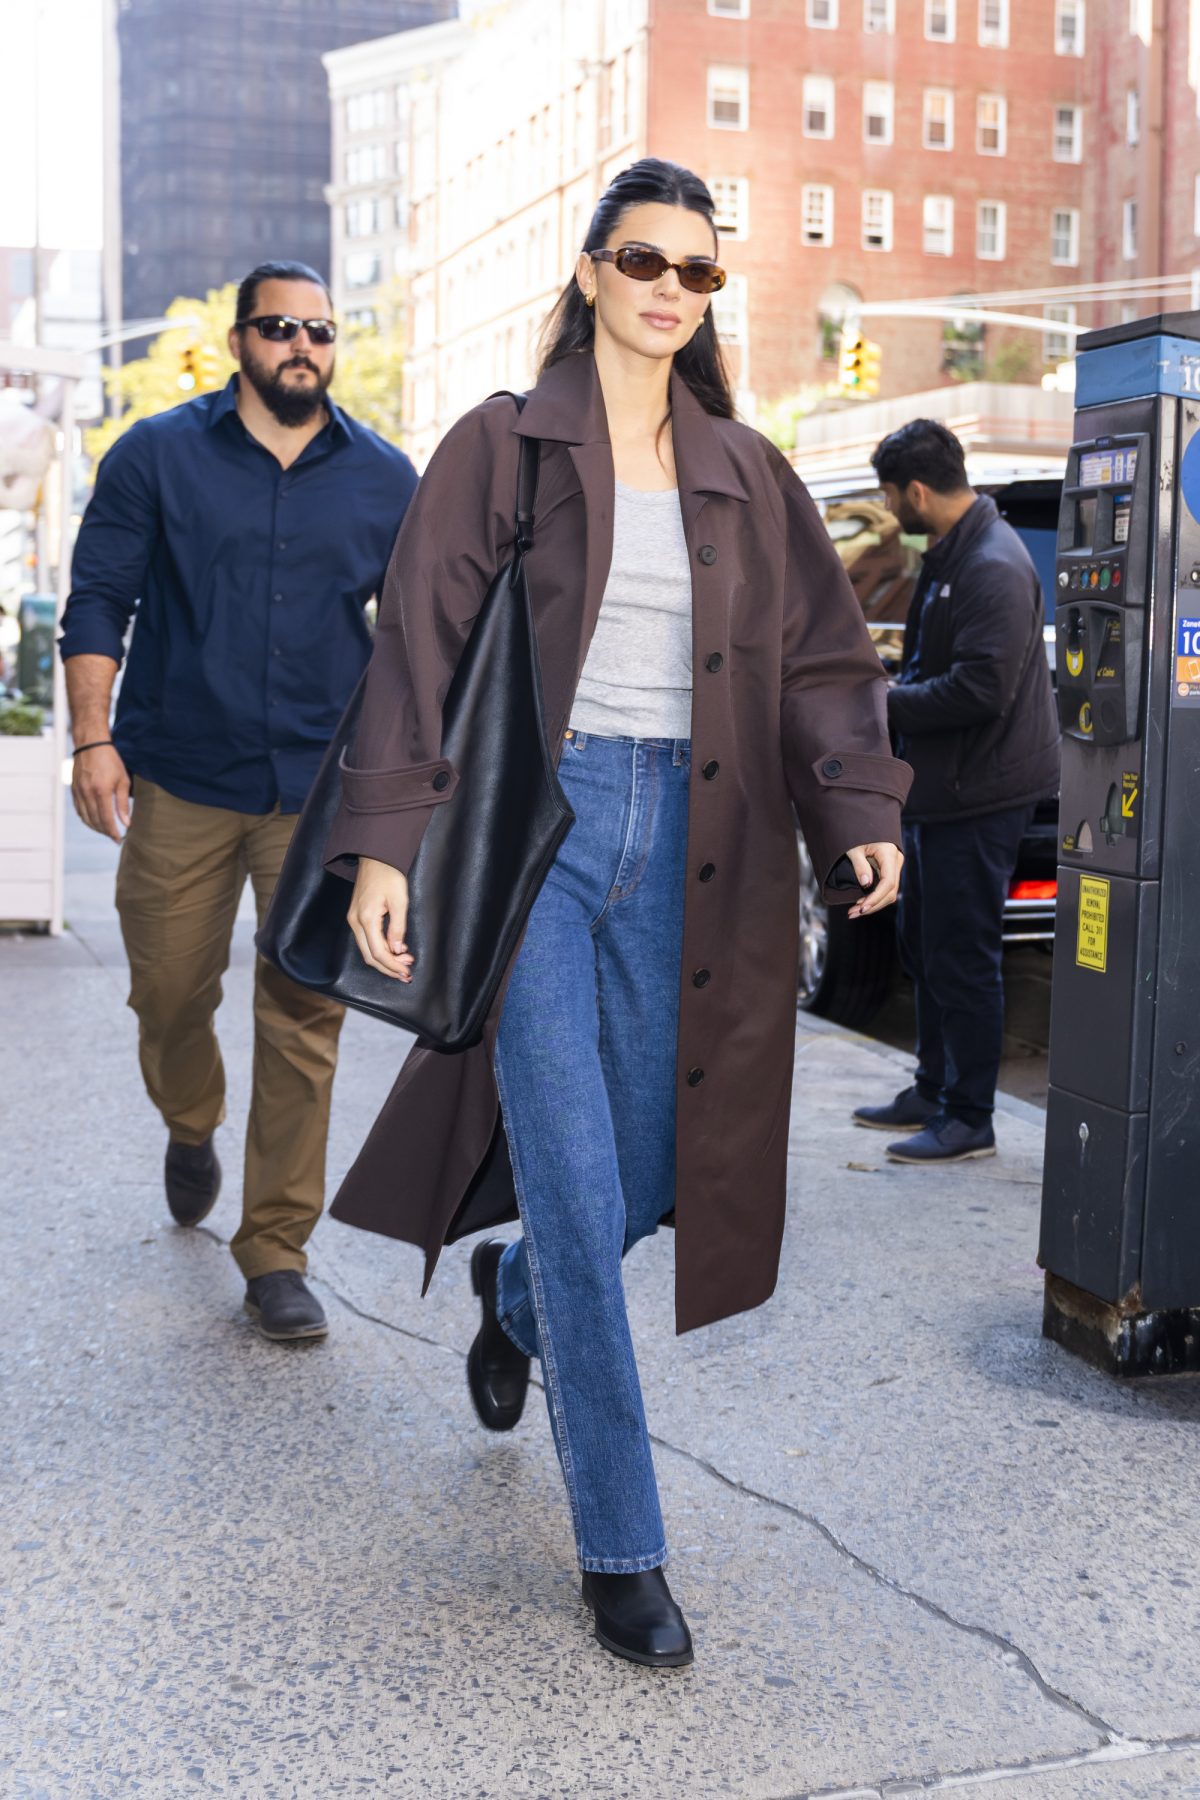 Kendall Jenner Wears Dr. Martens Boots + Yellow Hoodie in NYC